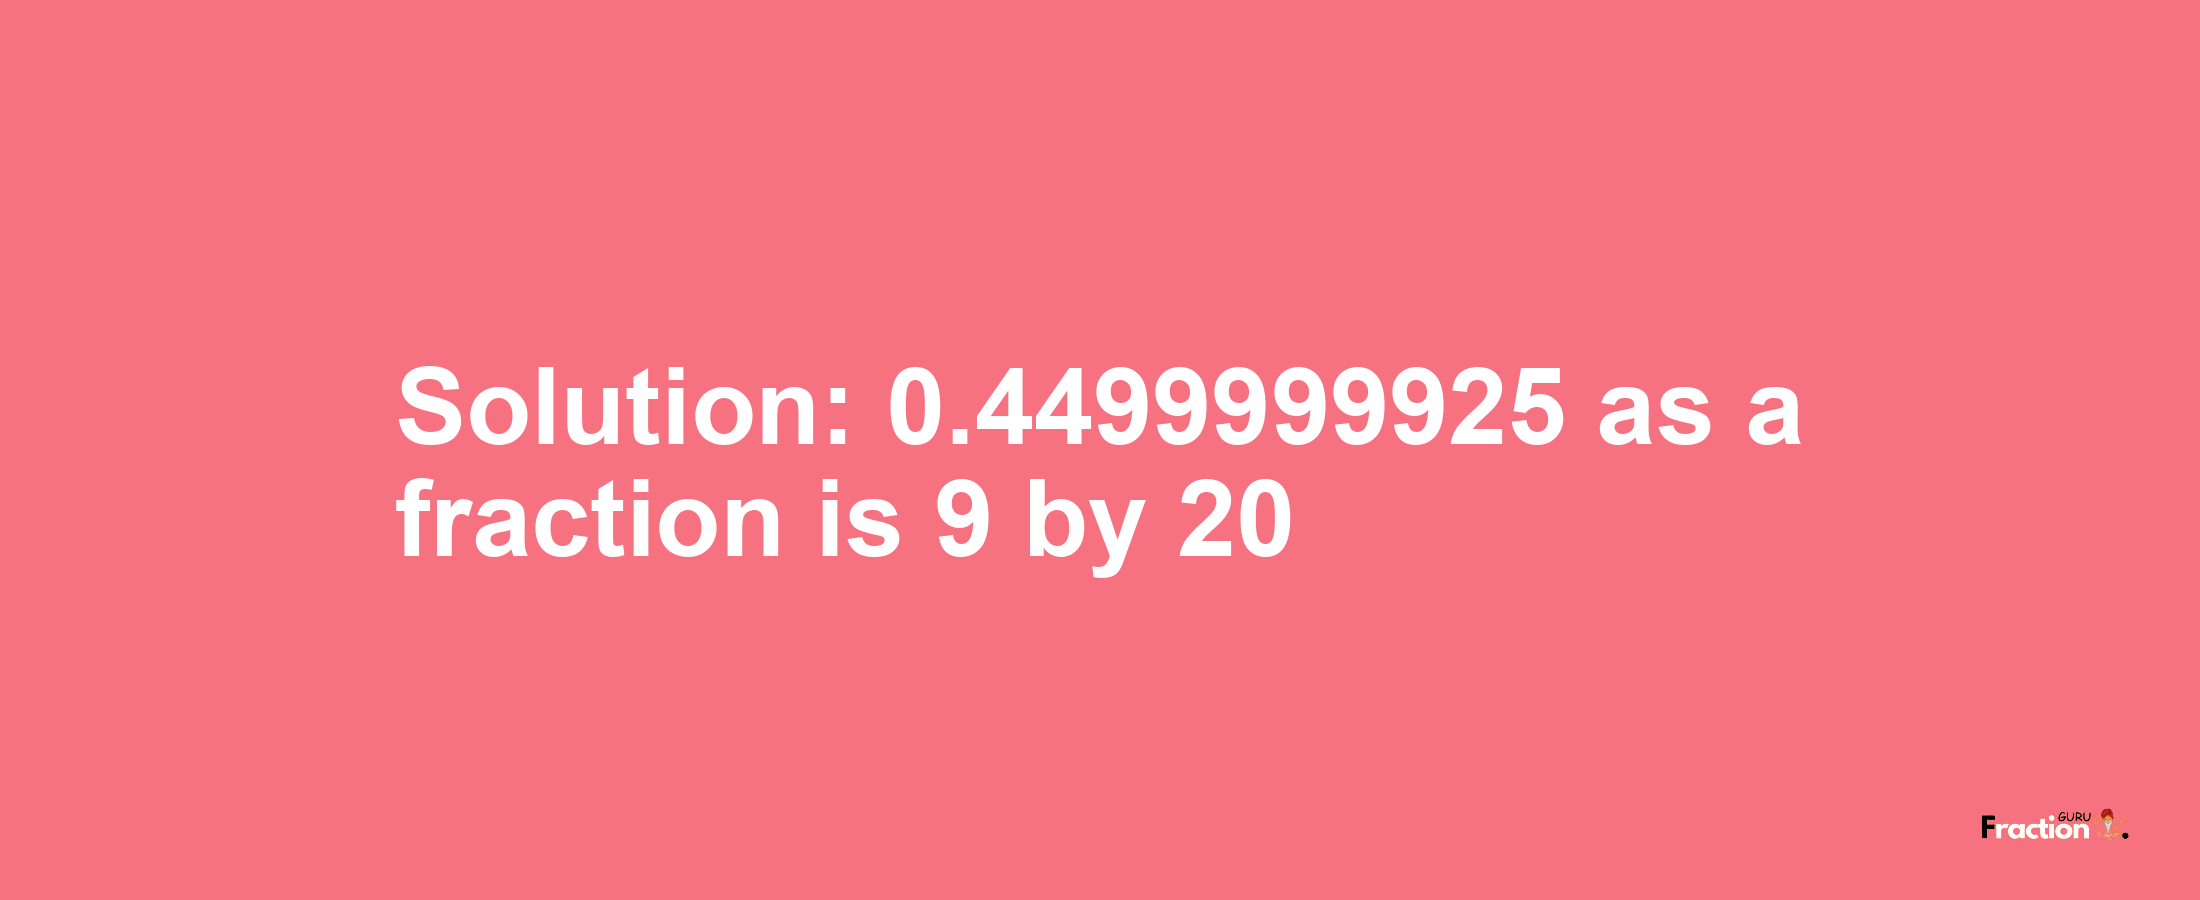 Solution:0.4499999925 as a fraction is 9/20